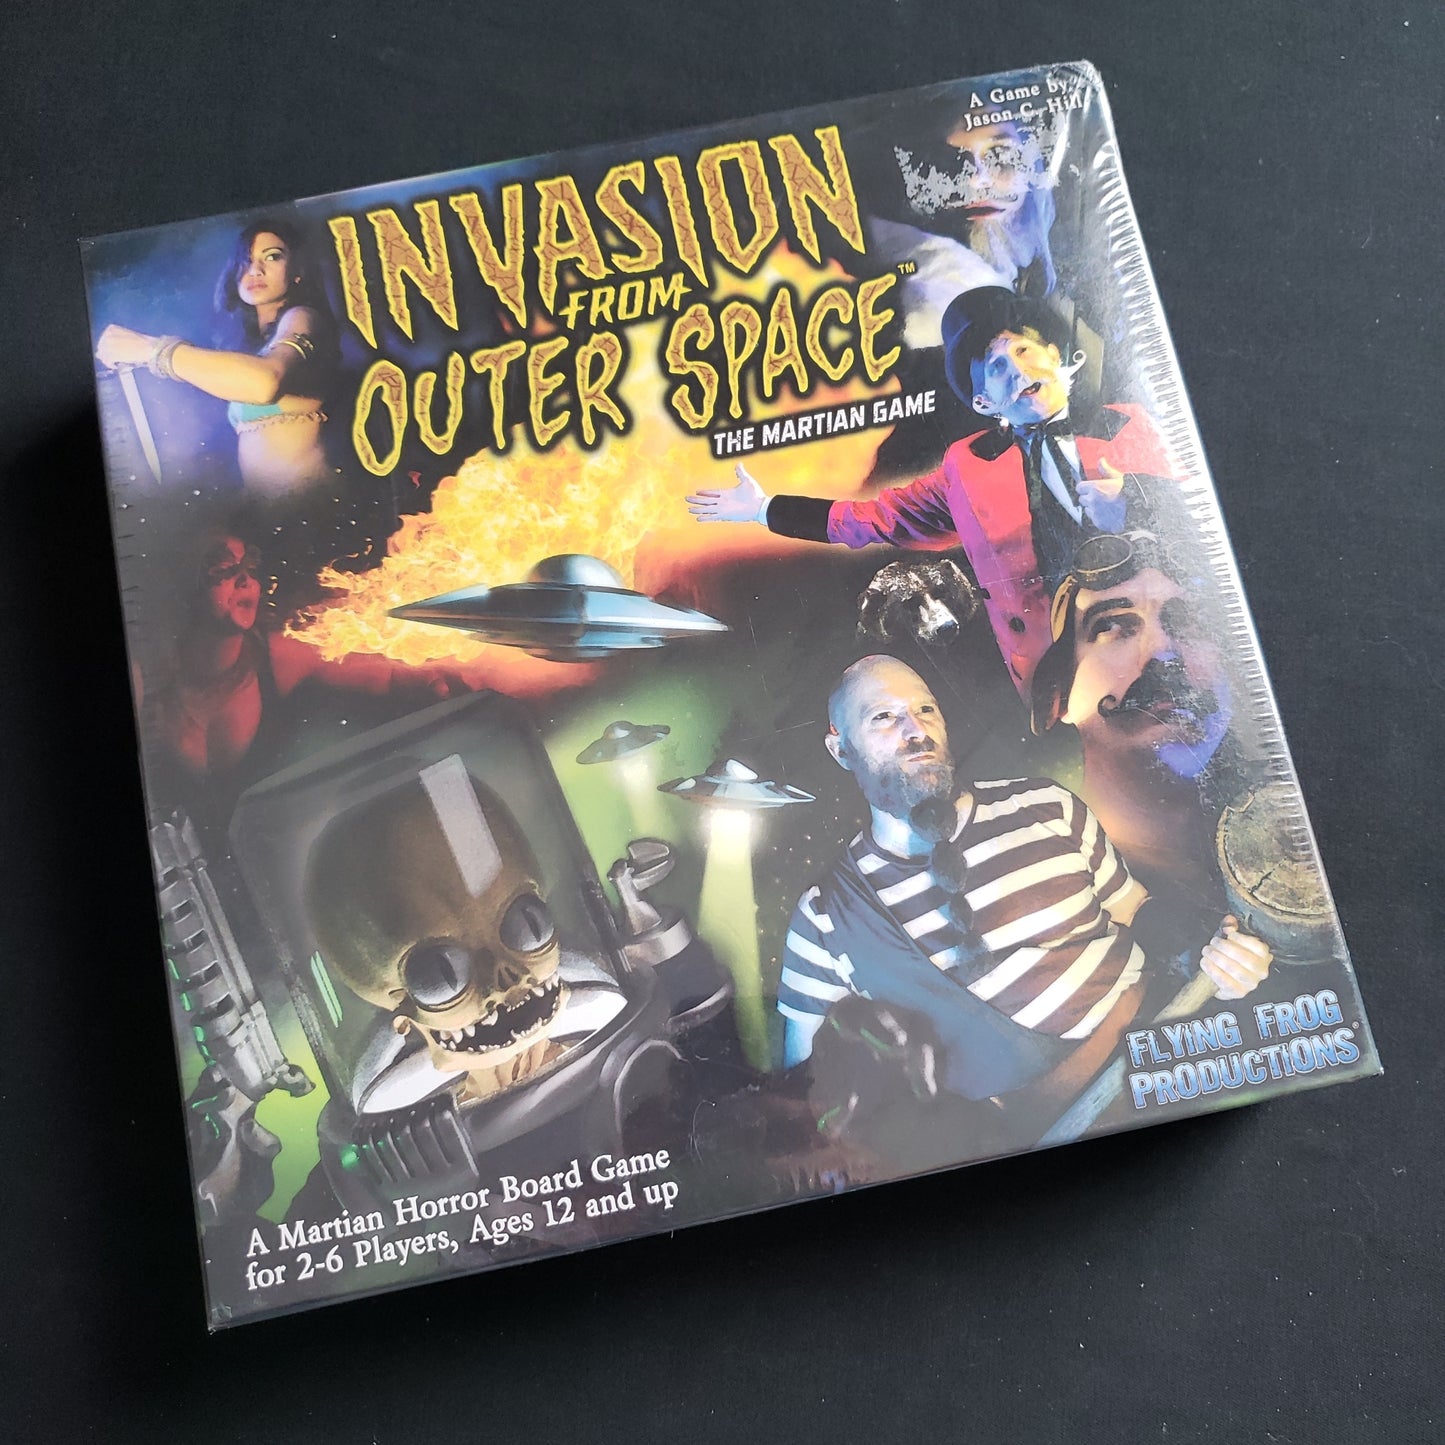 Image shows the front cover of the box of the Invasion from Outer Space board game